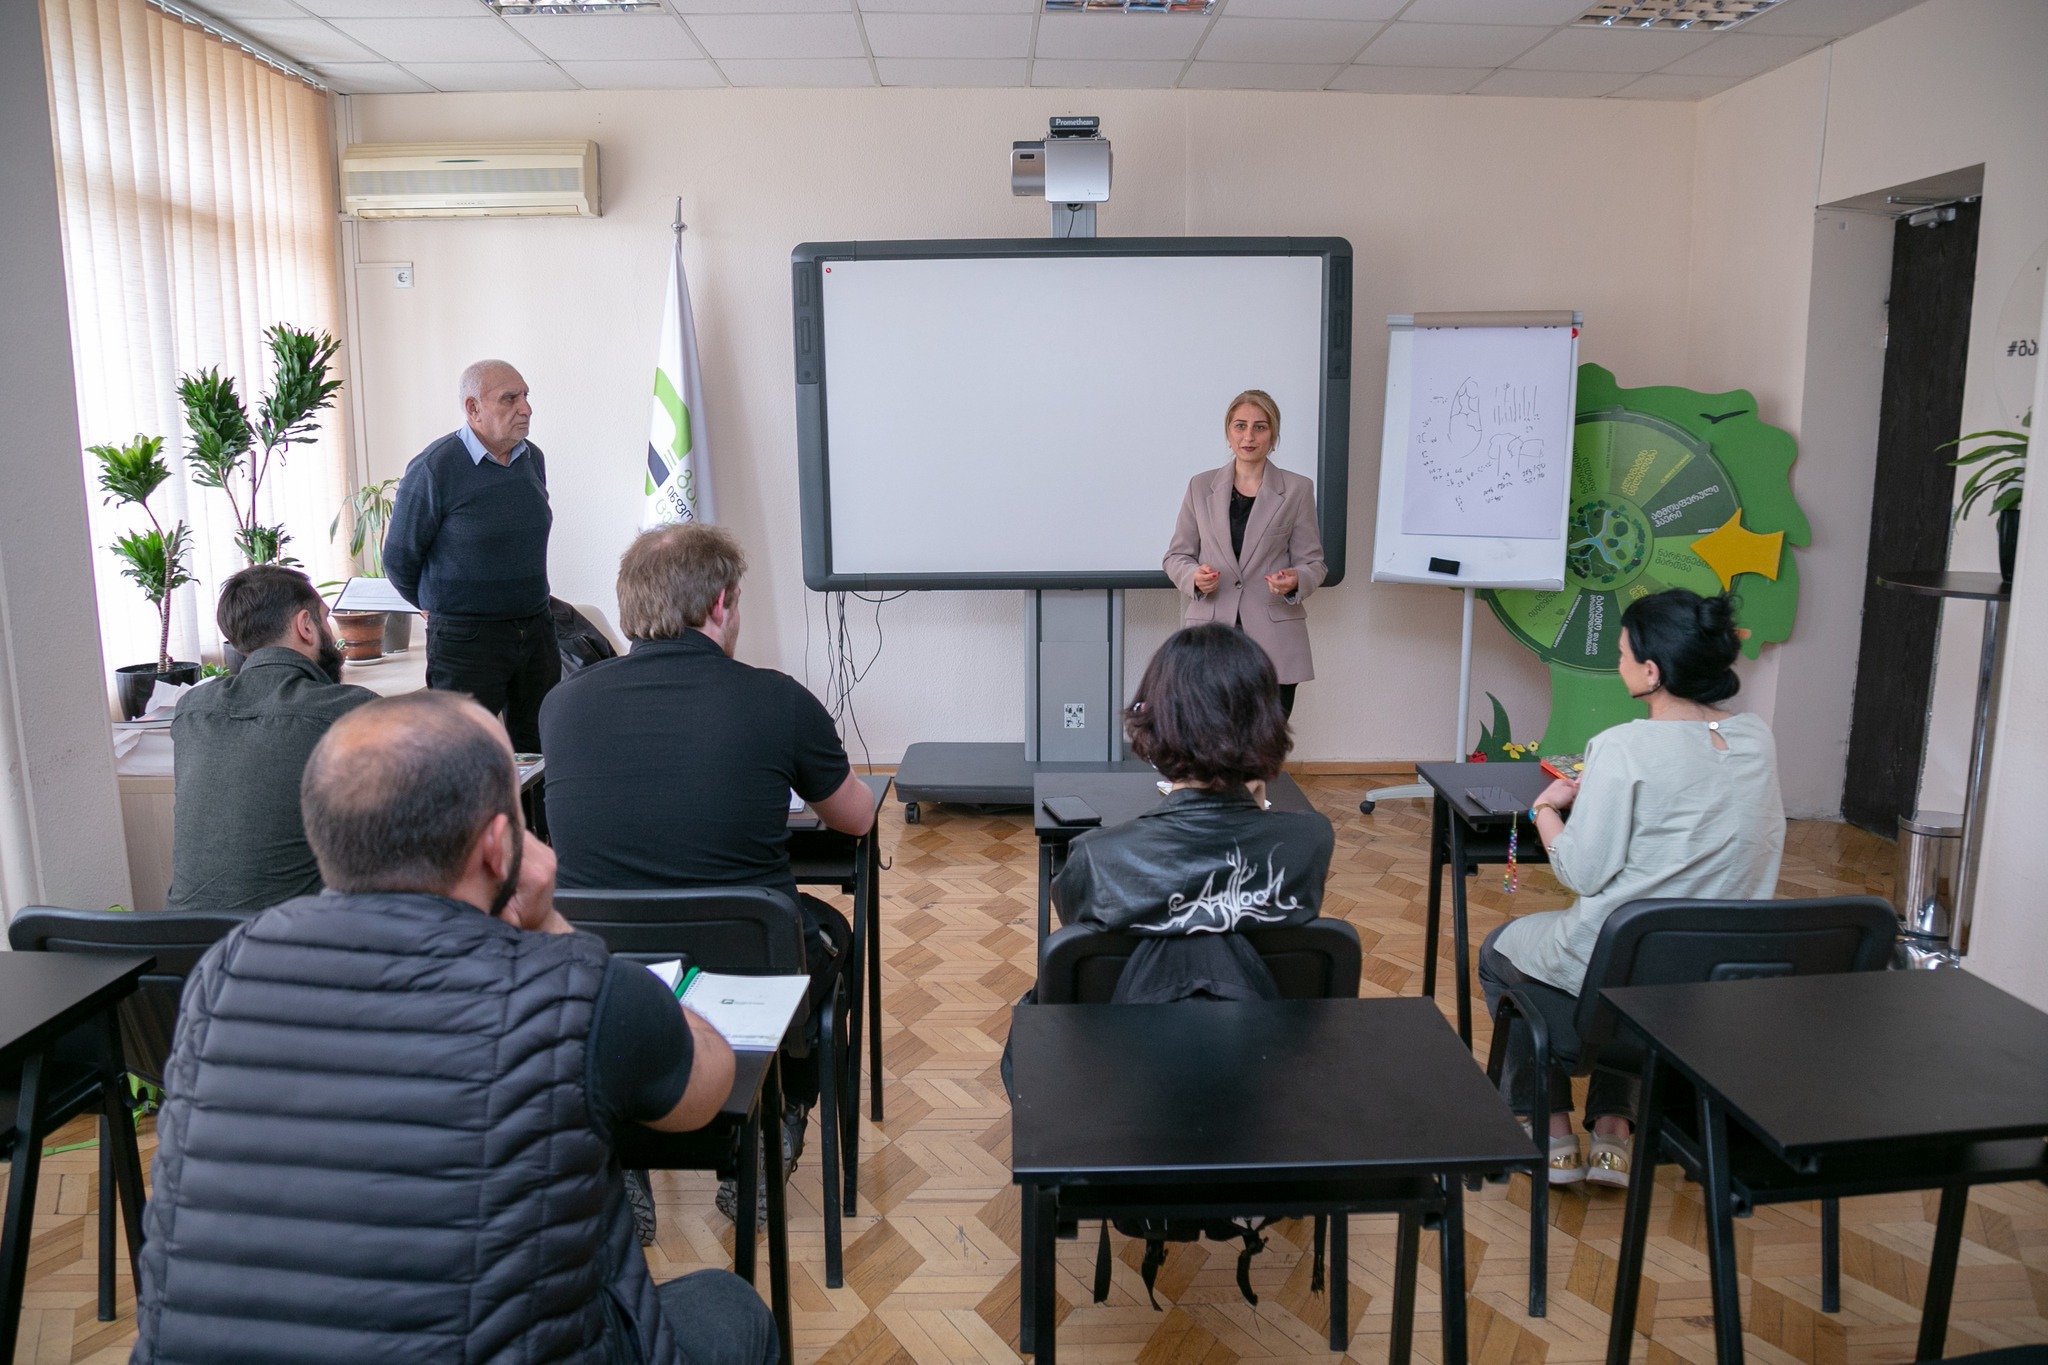 The vocational program’’ Forest inventory and taxation" has begun